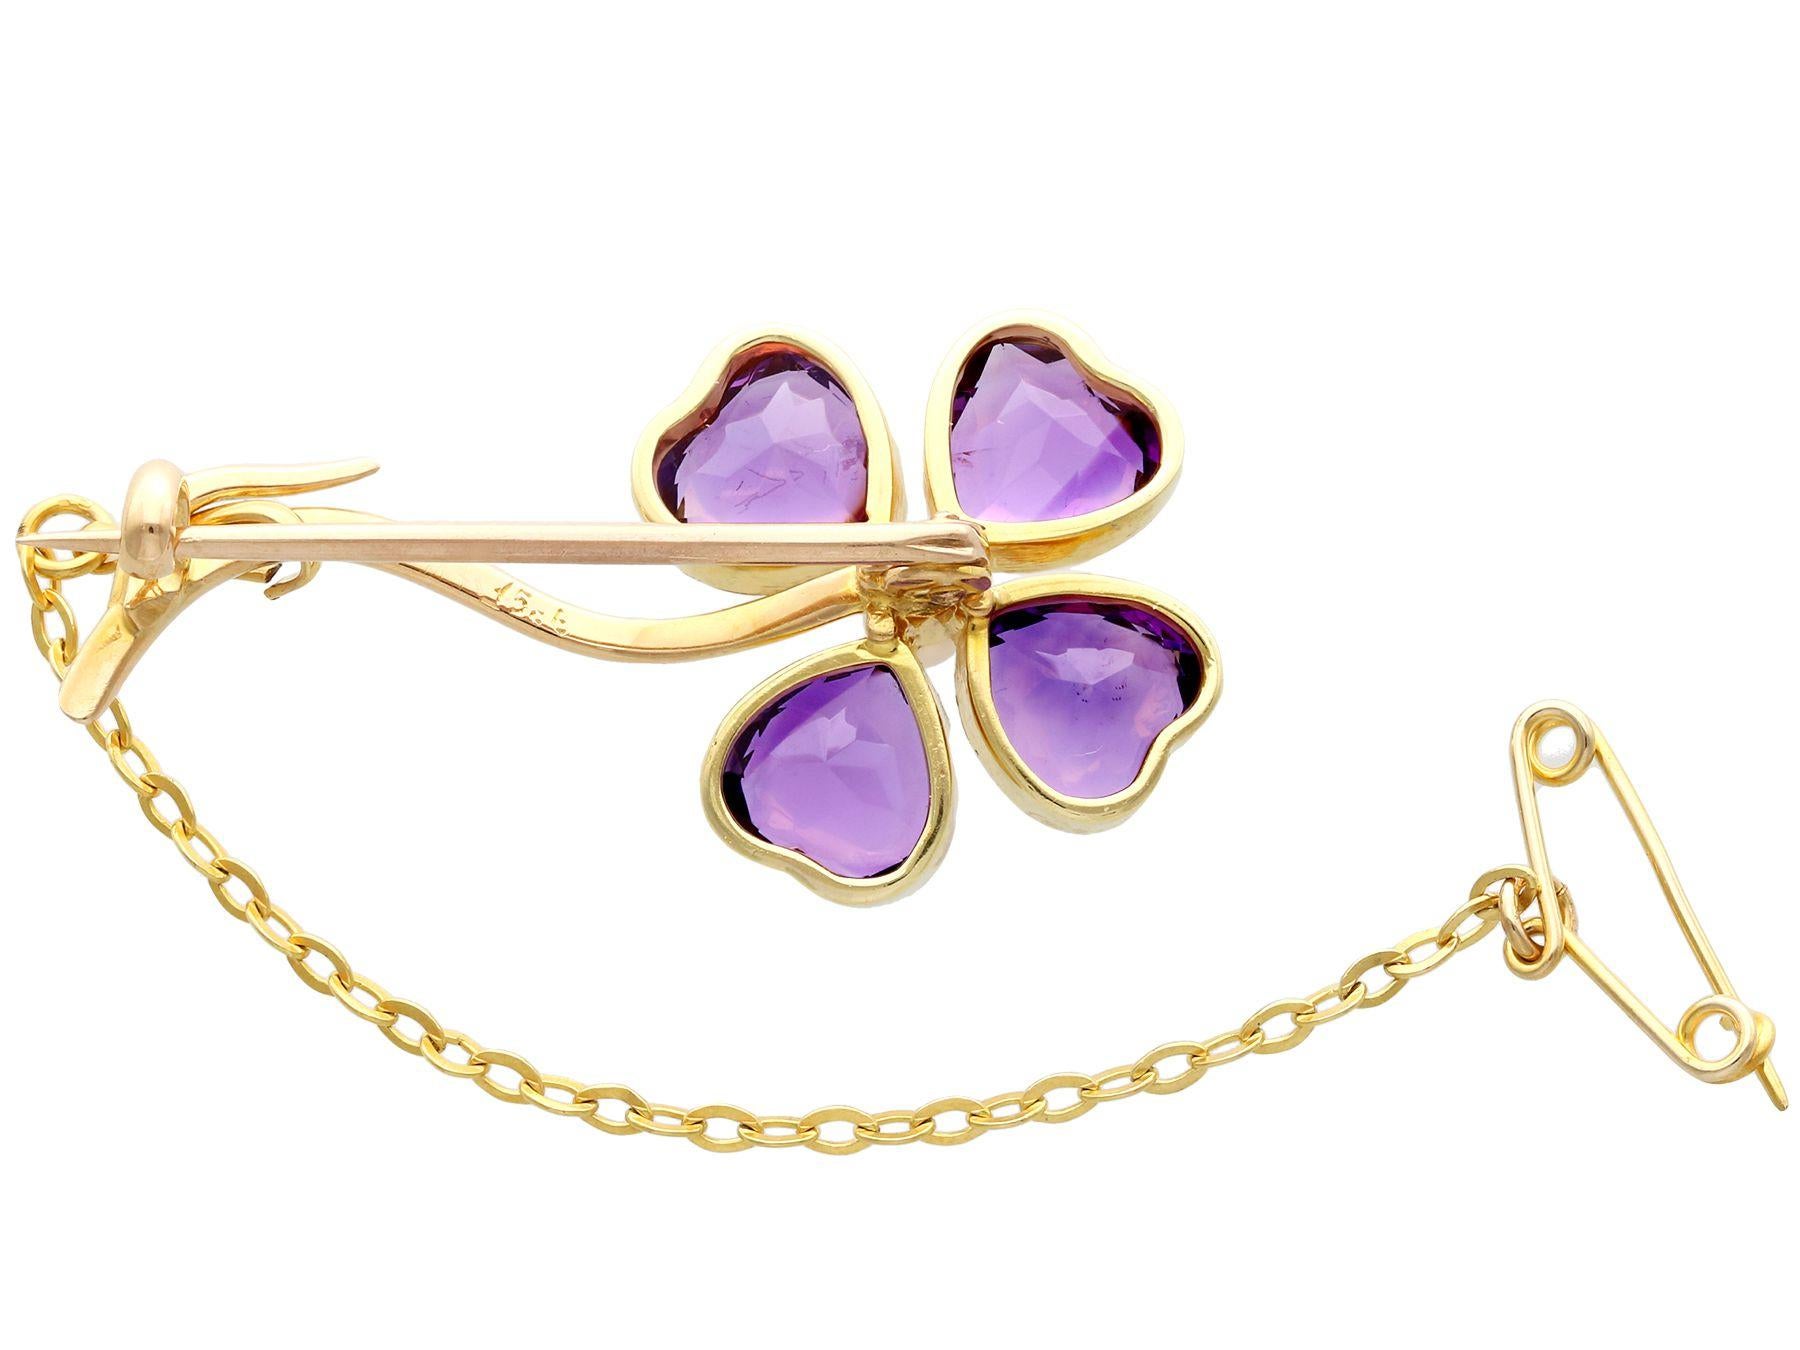 Women's or Men's Antique 4.25 Carat Amethyst and Pearl 15k Yellow Gold Four-Leaf Clover Brooch For Sale